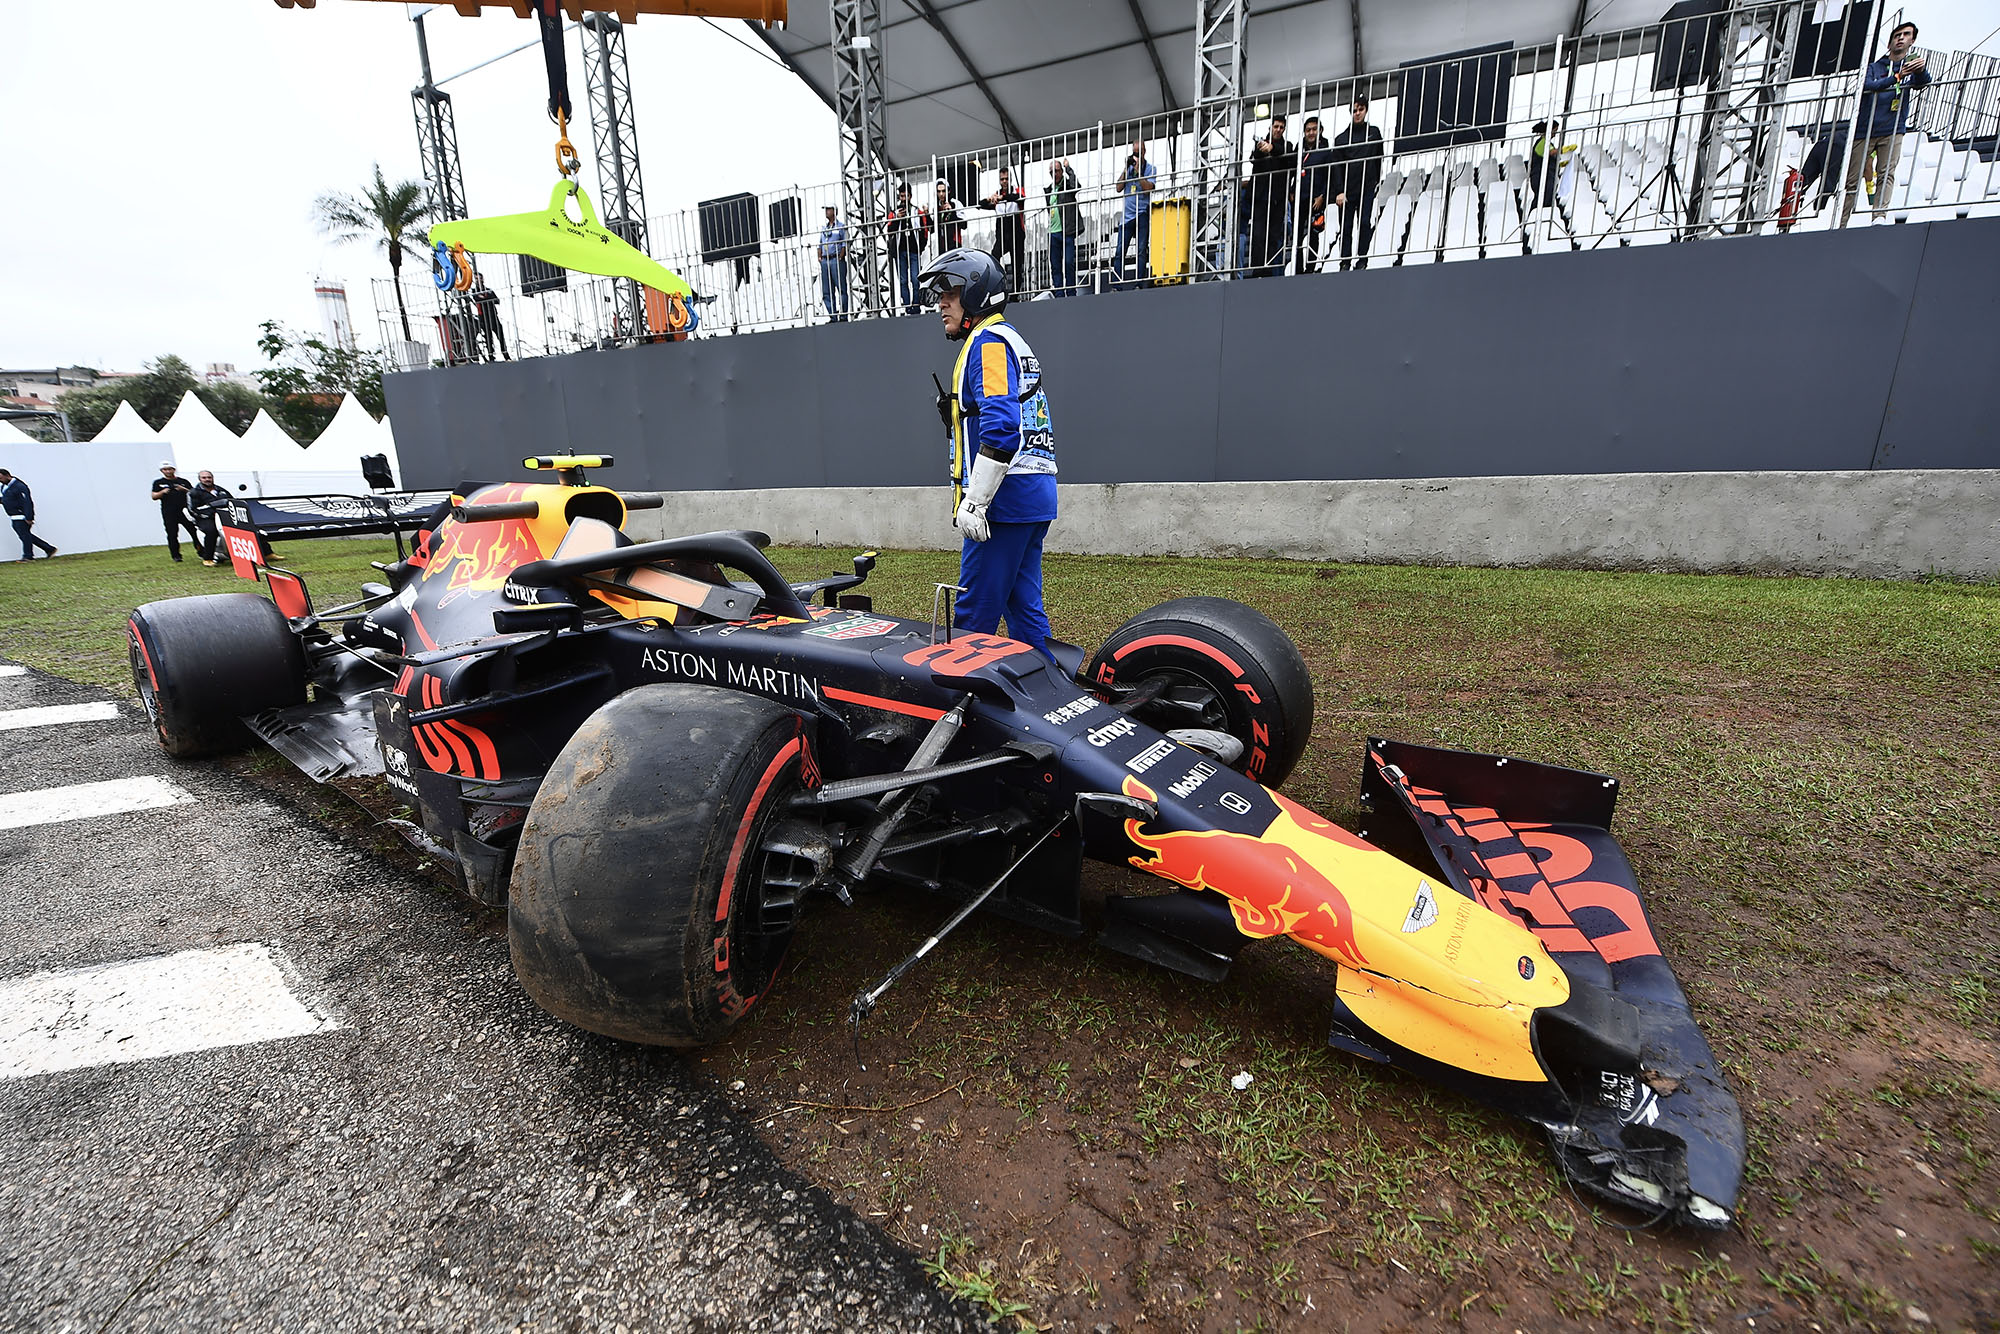 Alexander Albon's crashed car during Friday practice for the 2019 F1 Brazilian Grand Prix